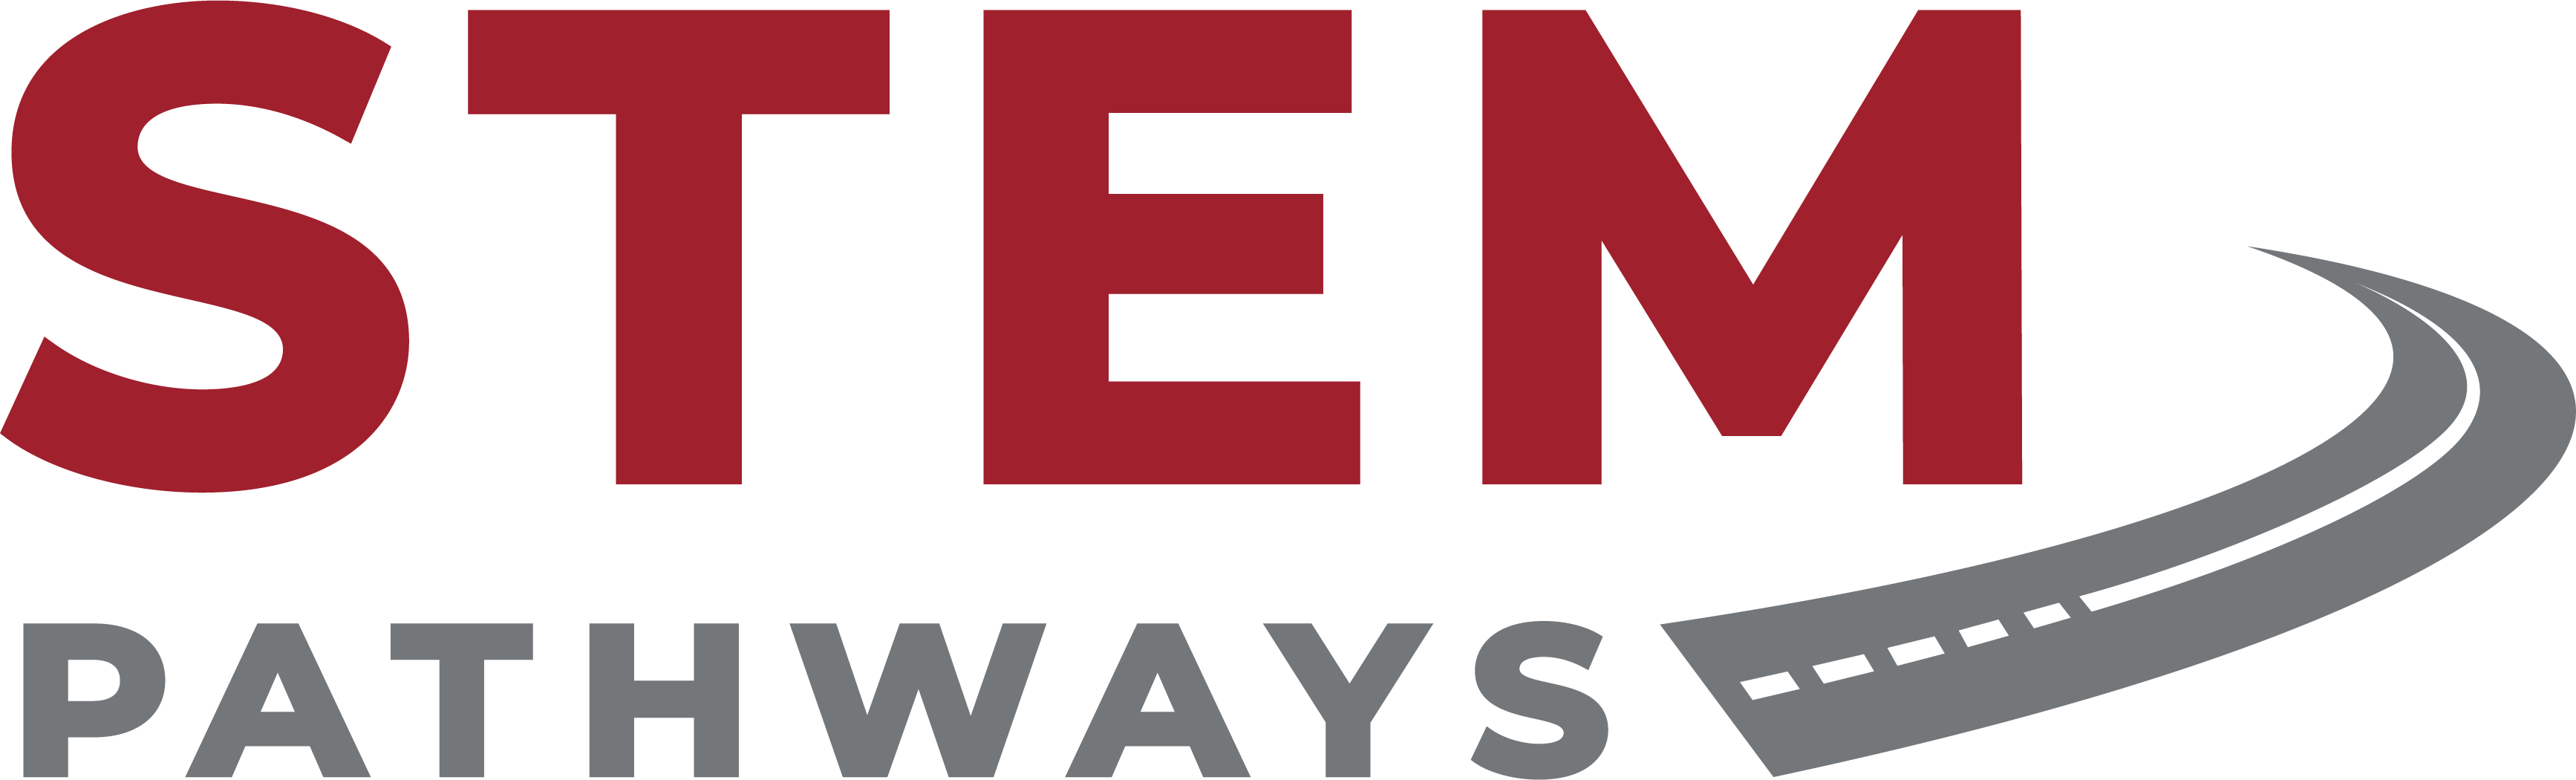 STEM Pathways logo with red and gray letters.